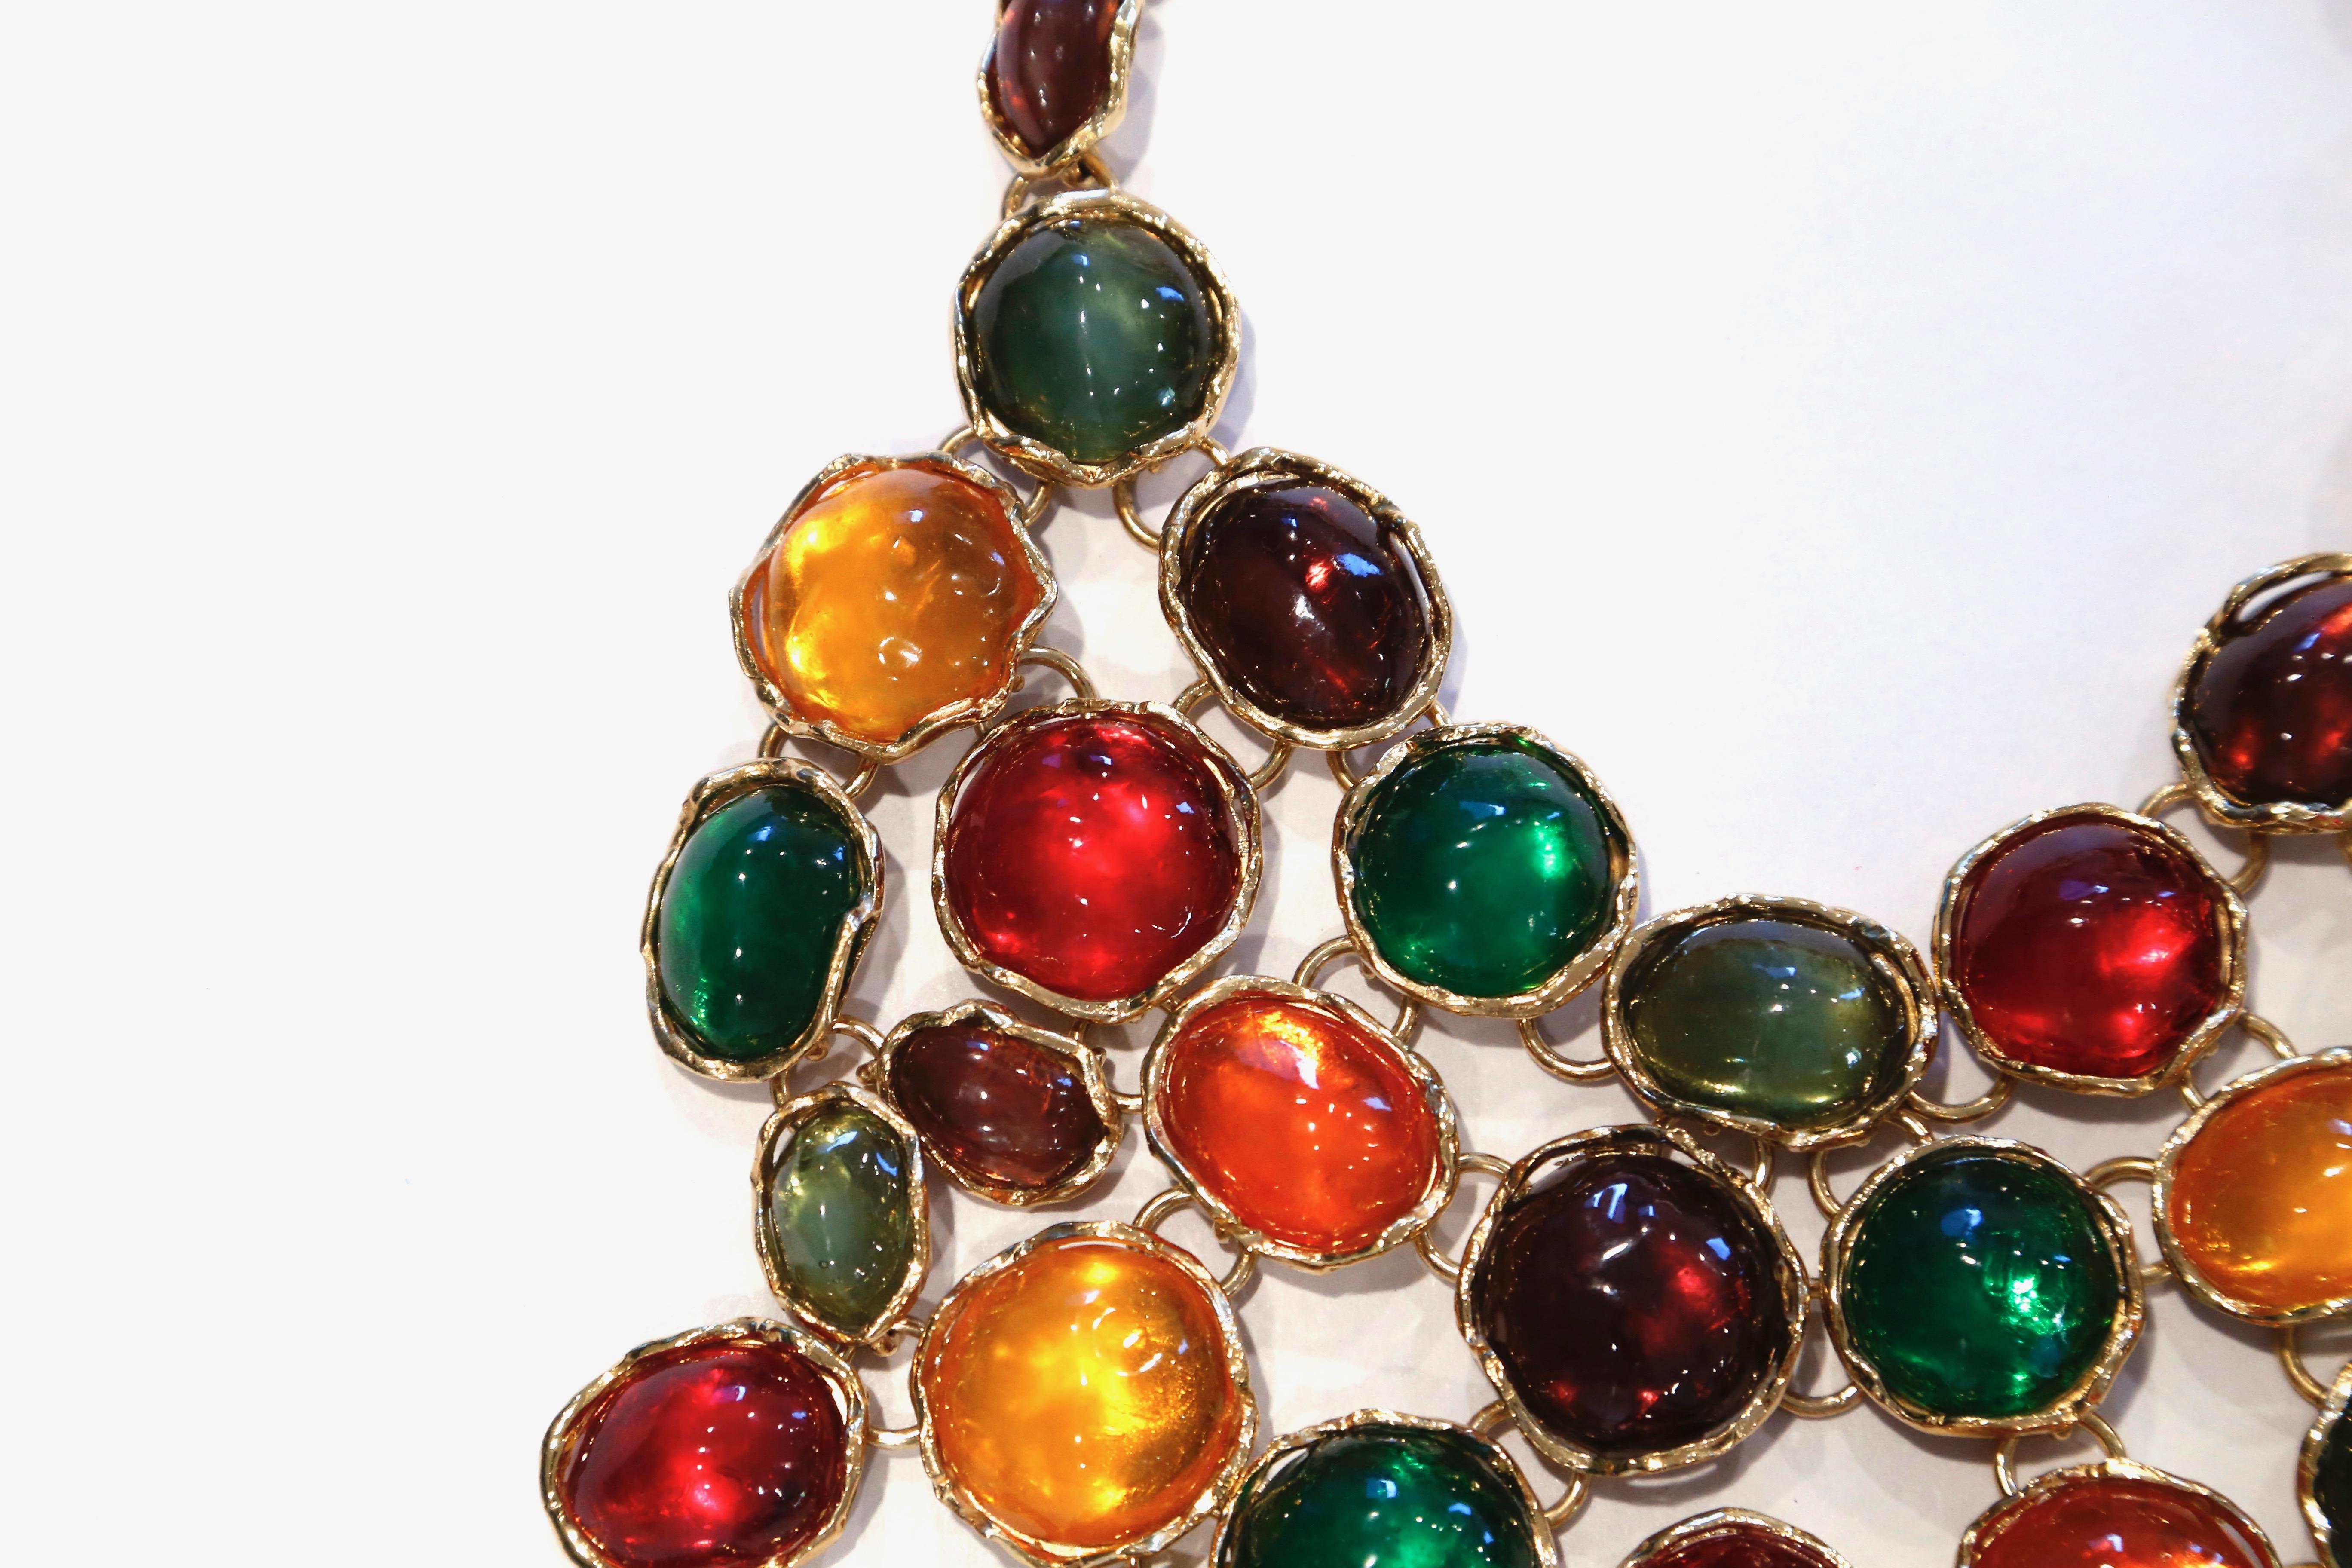 Dramatic, oversized, poured glass, bib necklace designed by Loulou de la Falaise for Yves saint Laurent dating to 1989 as featured on the haute couture runway. Necklace features multi-color poured glass set in gold-gilt metal. Adjustable hook